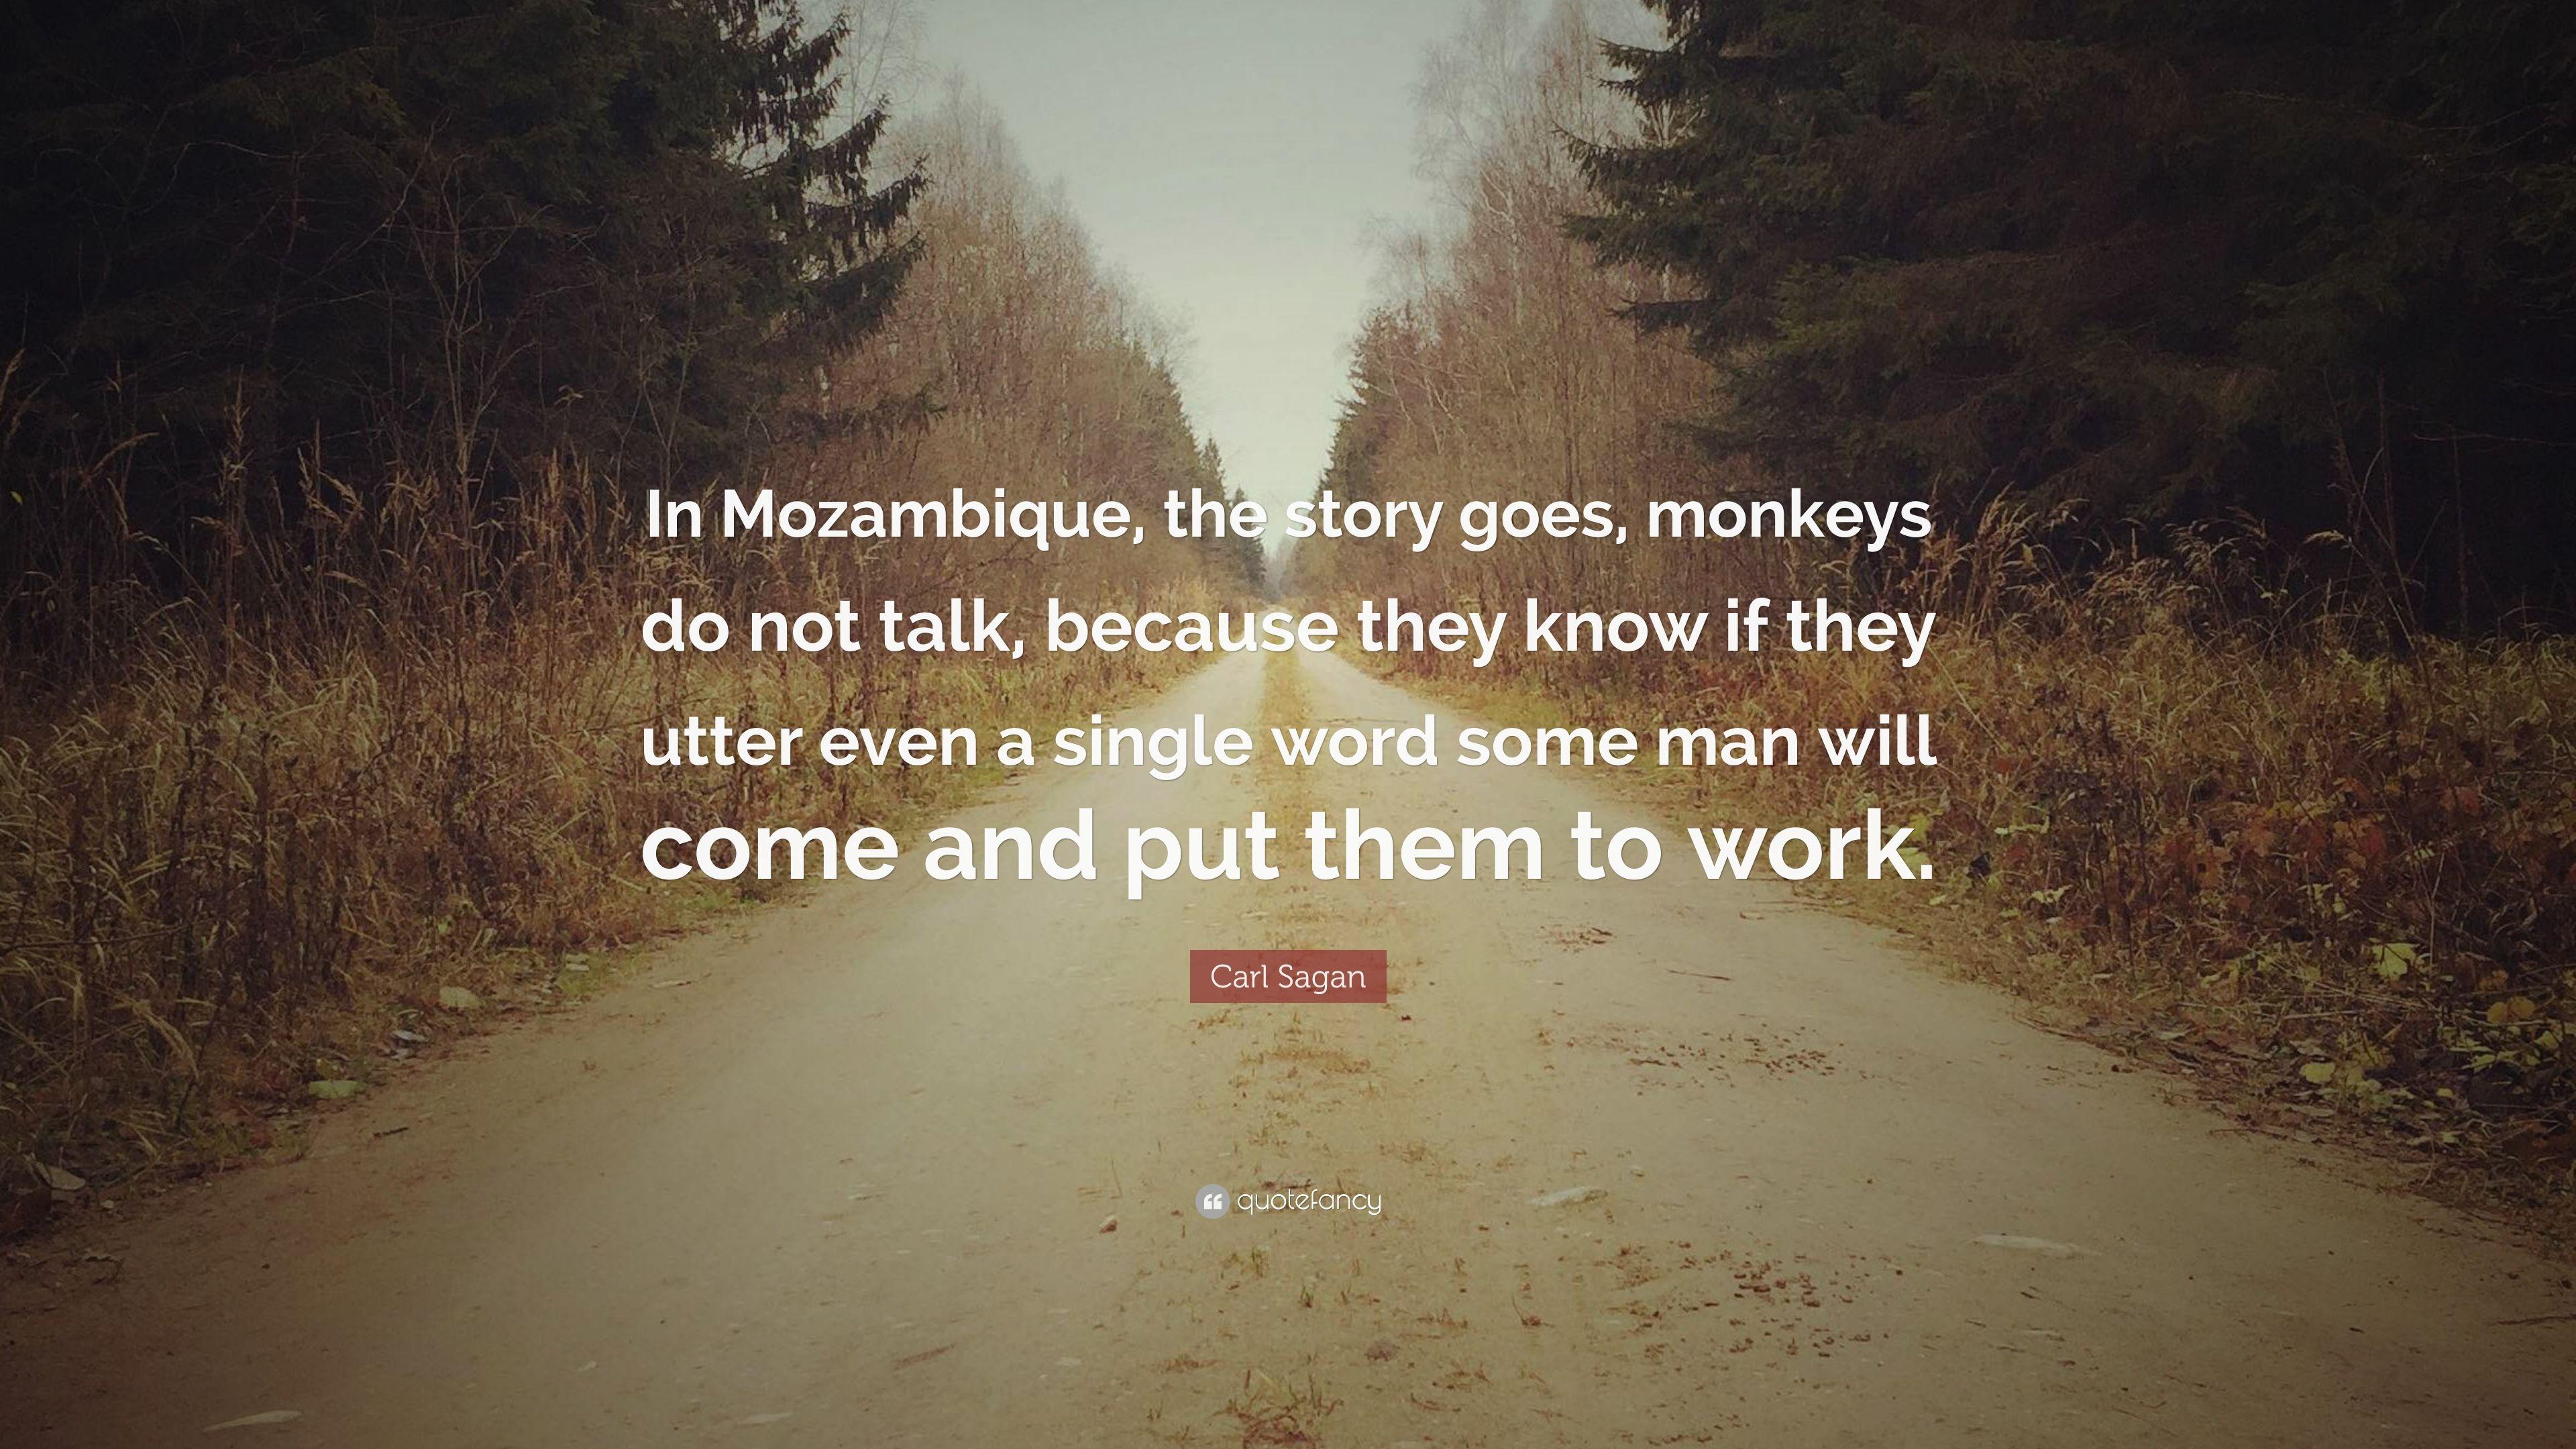 Carl Sagan Quote: “In Mozambique, the story goes, monkeys do not